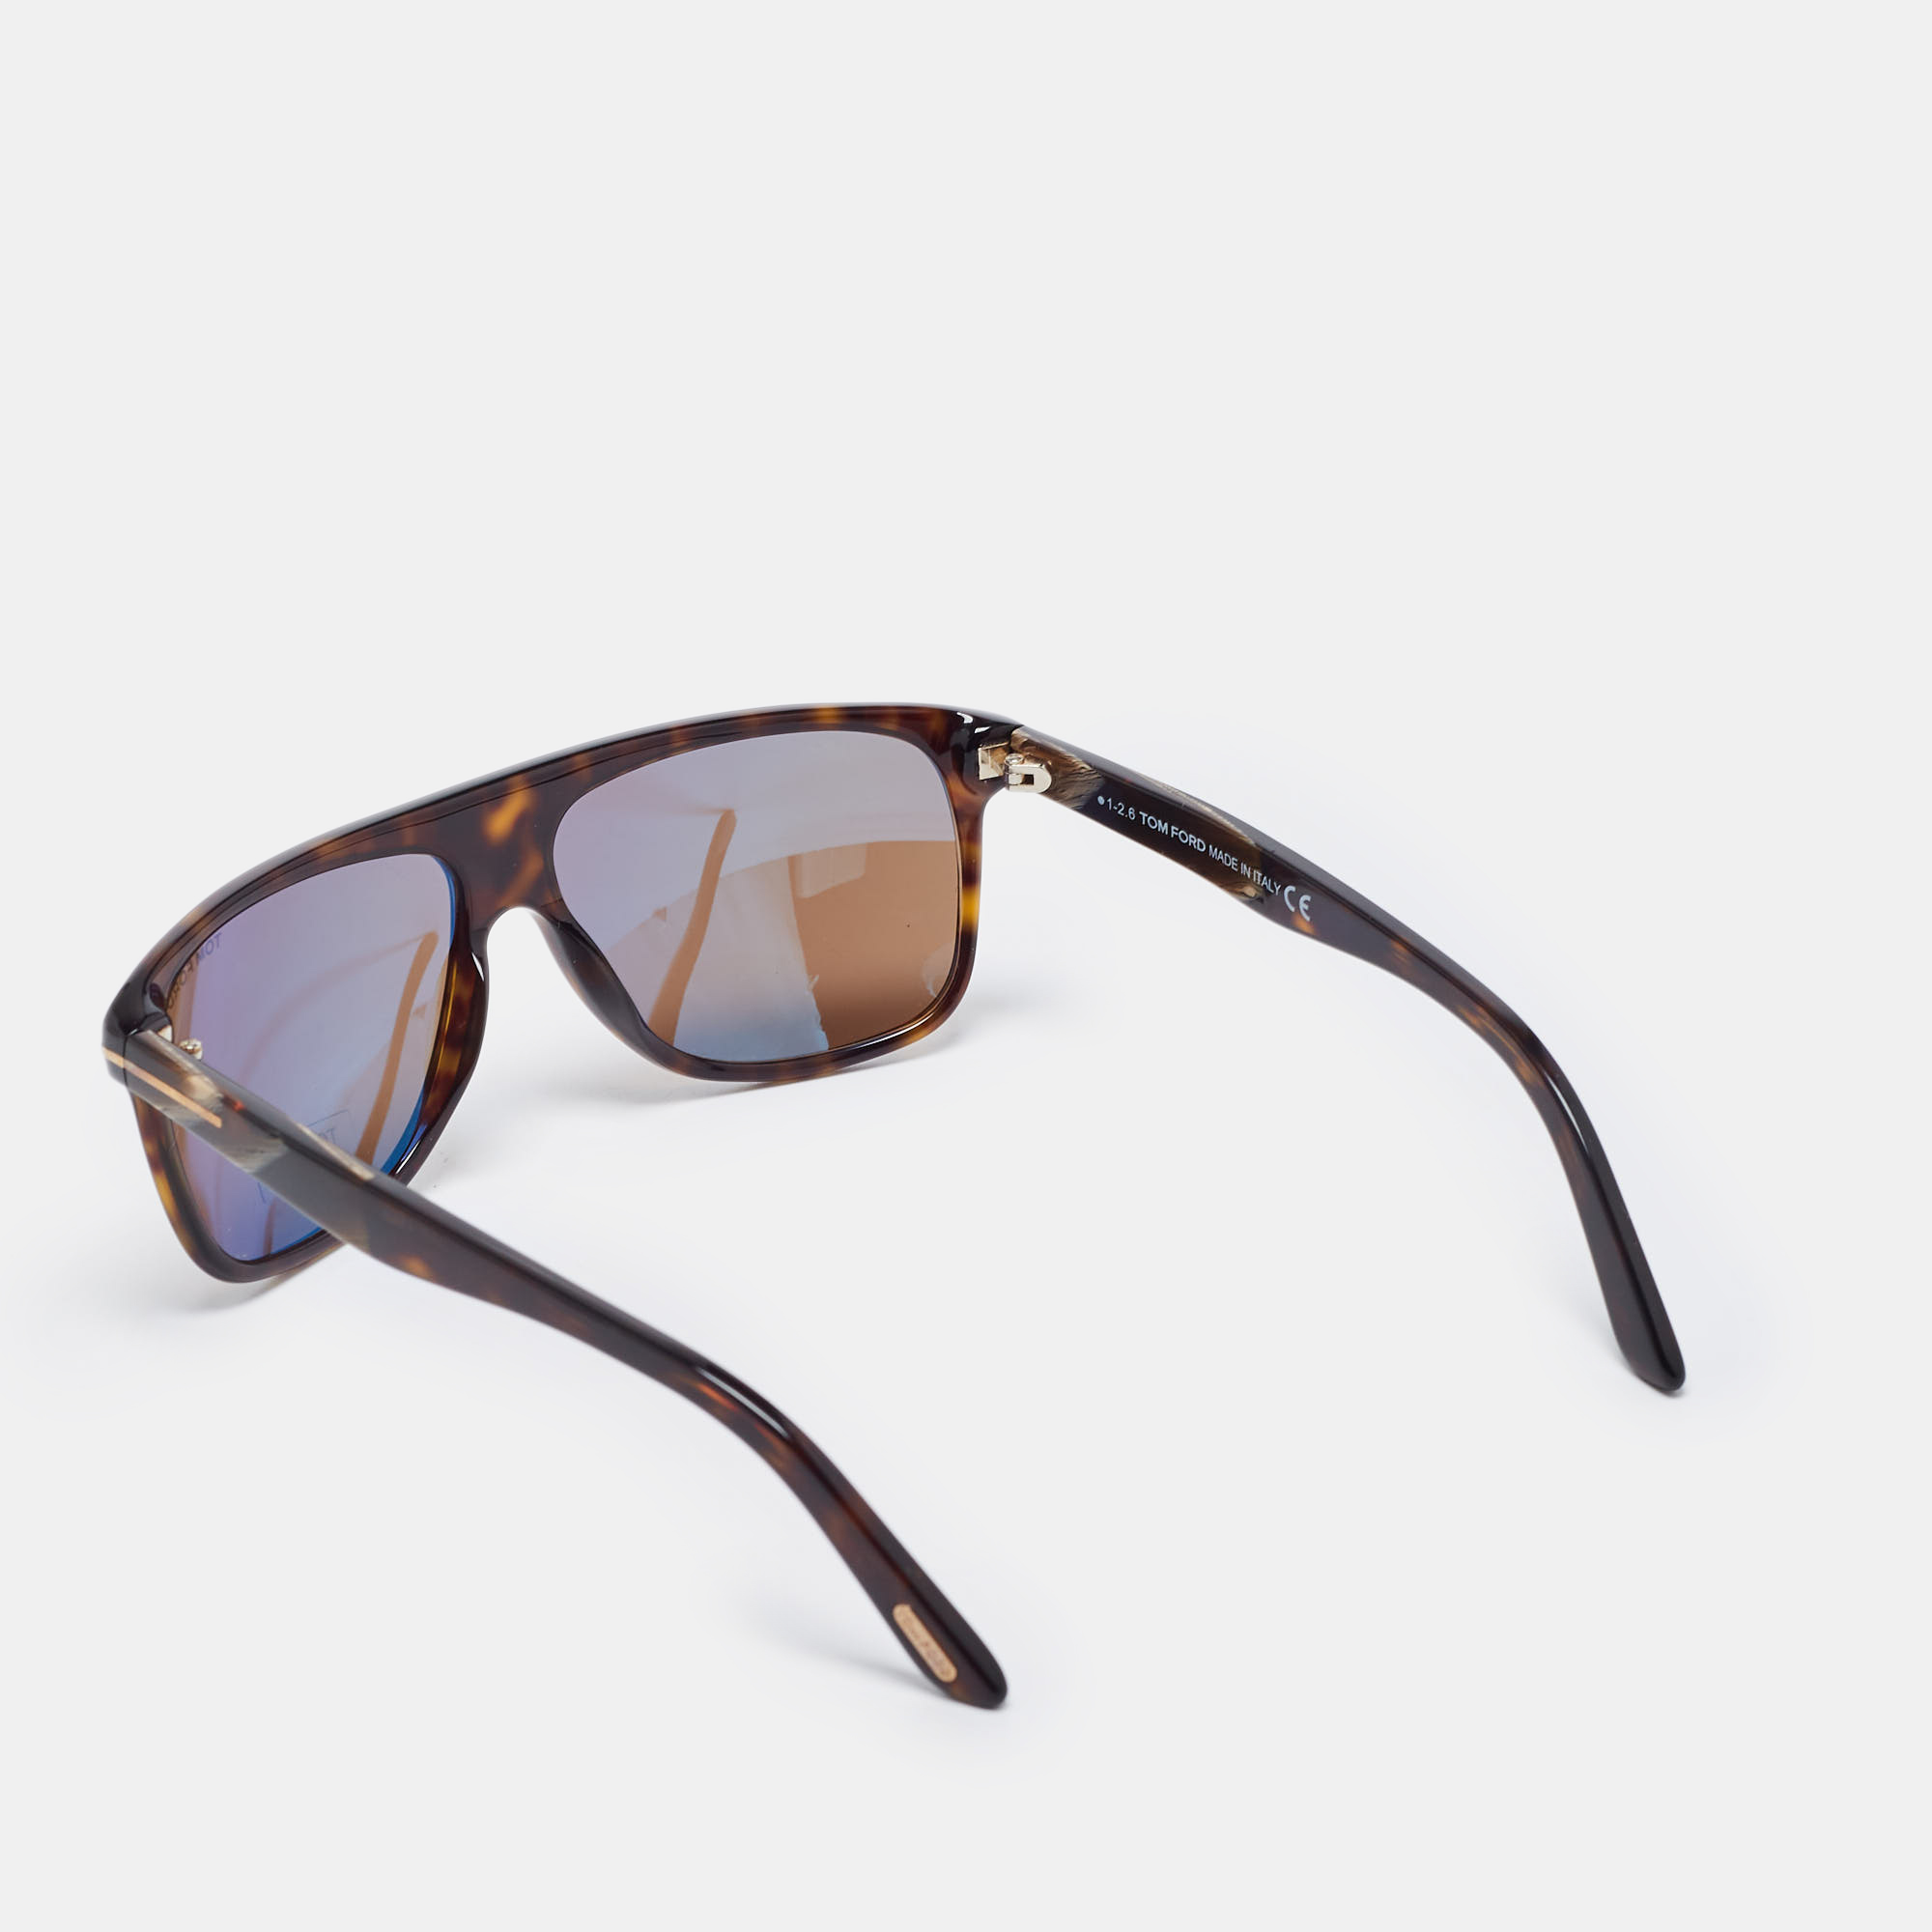 Tom Ford Brown Gradient TP501 Square Sunglasses